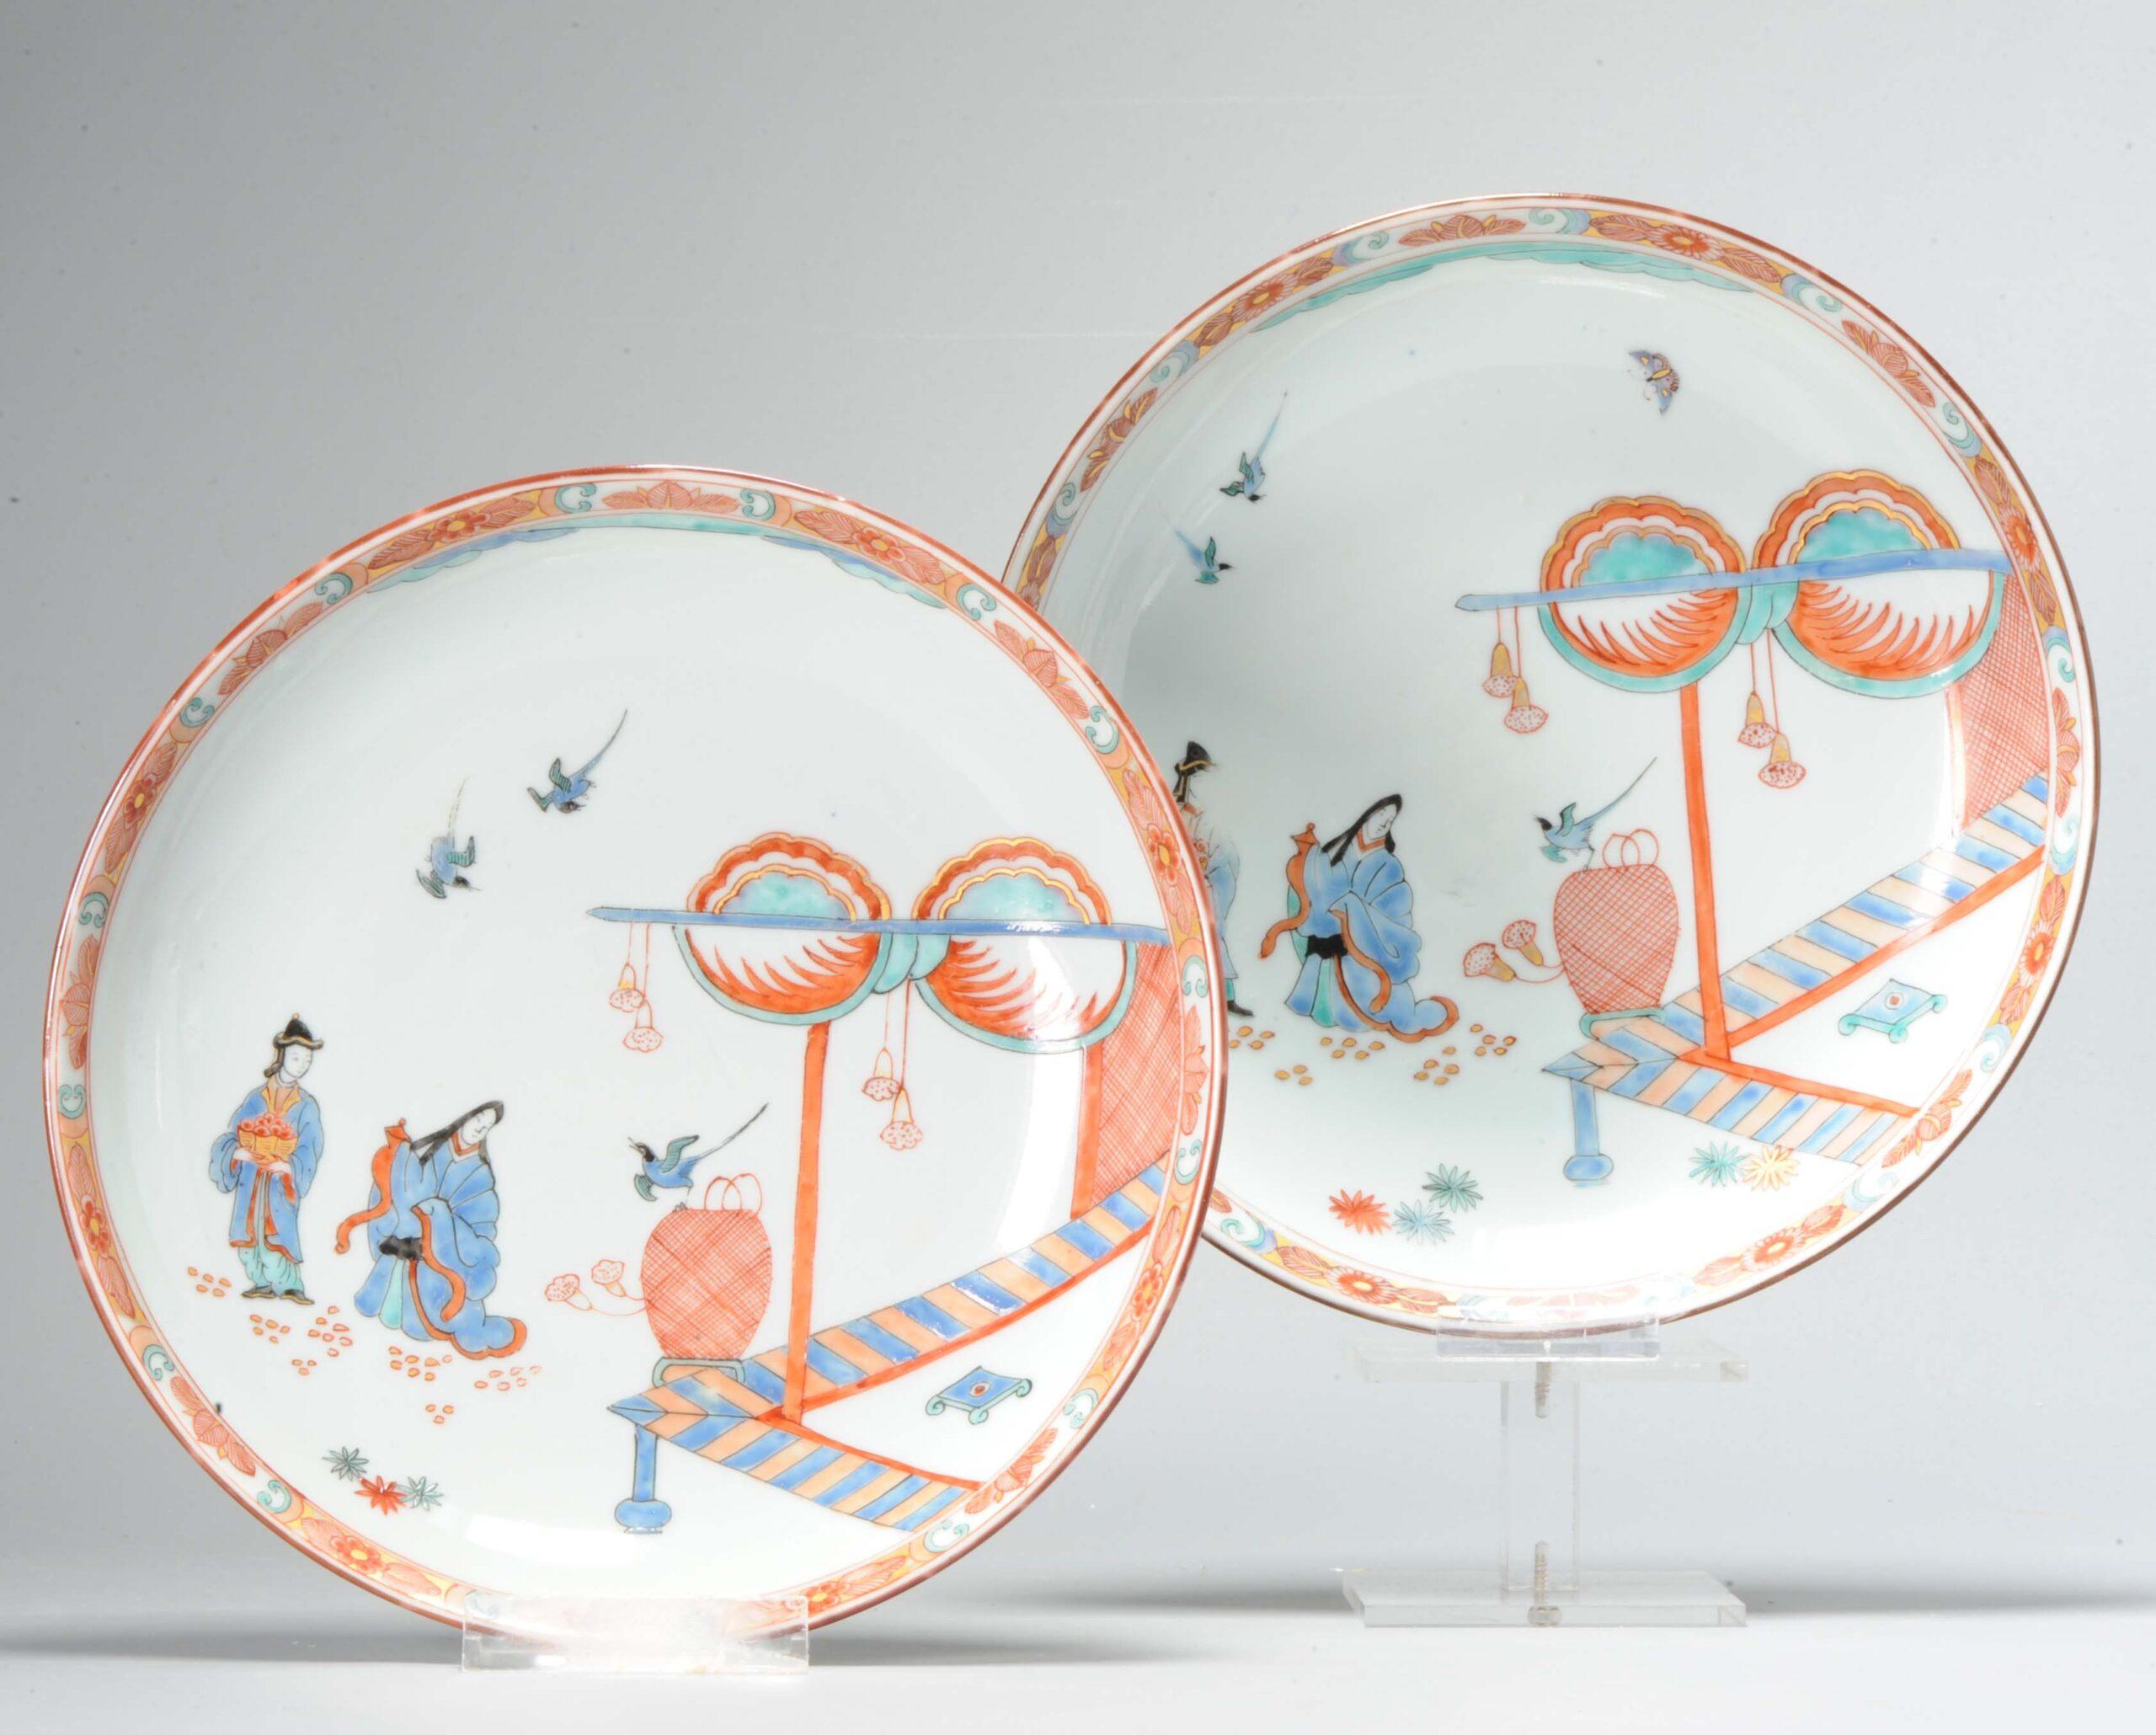 Sharing with you this unusual set of 2 Dutch decorated Kakiemon style deep dishes. The dish itself is a white porcelain plate from the Kangxi period, ca 1700-1720. The painting is Dutch Enamelling from ca 1710-1725. Visisble is a scene in what seems